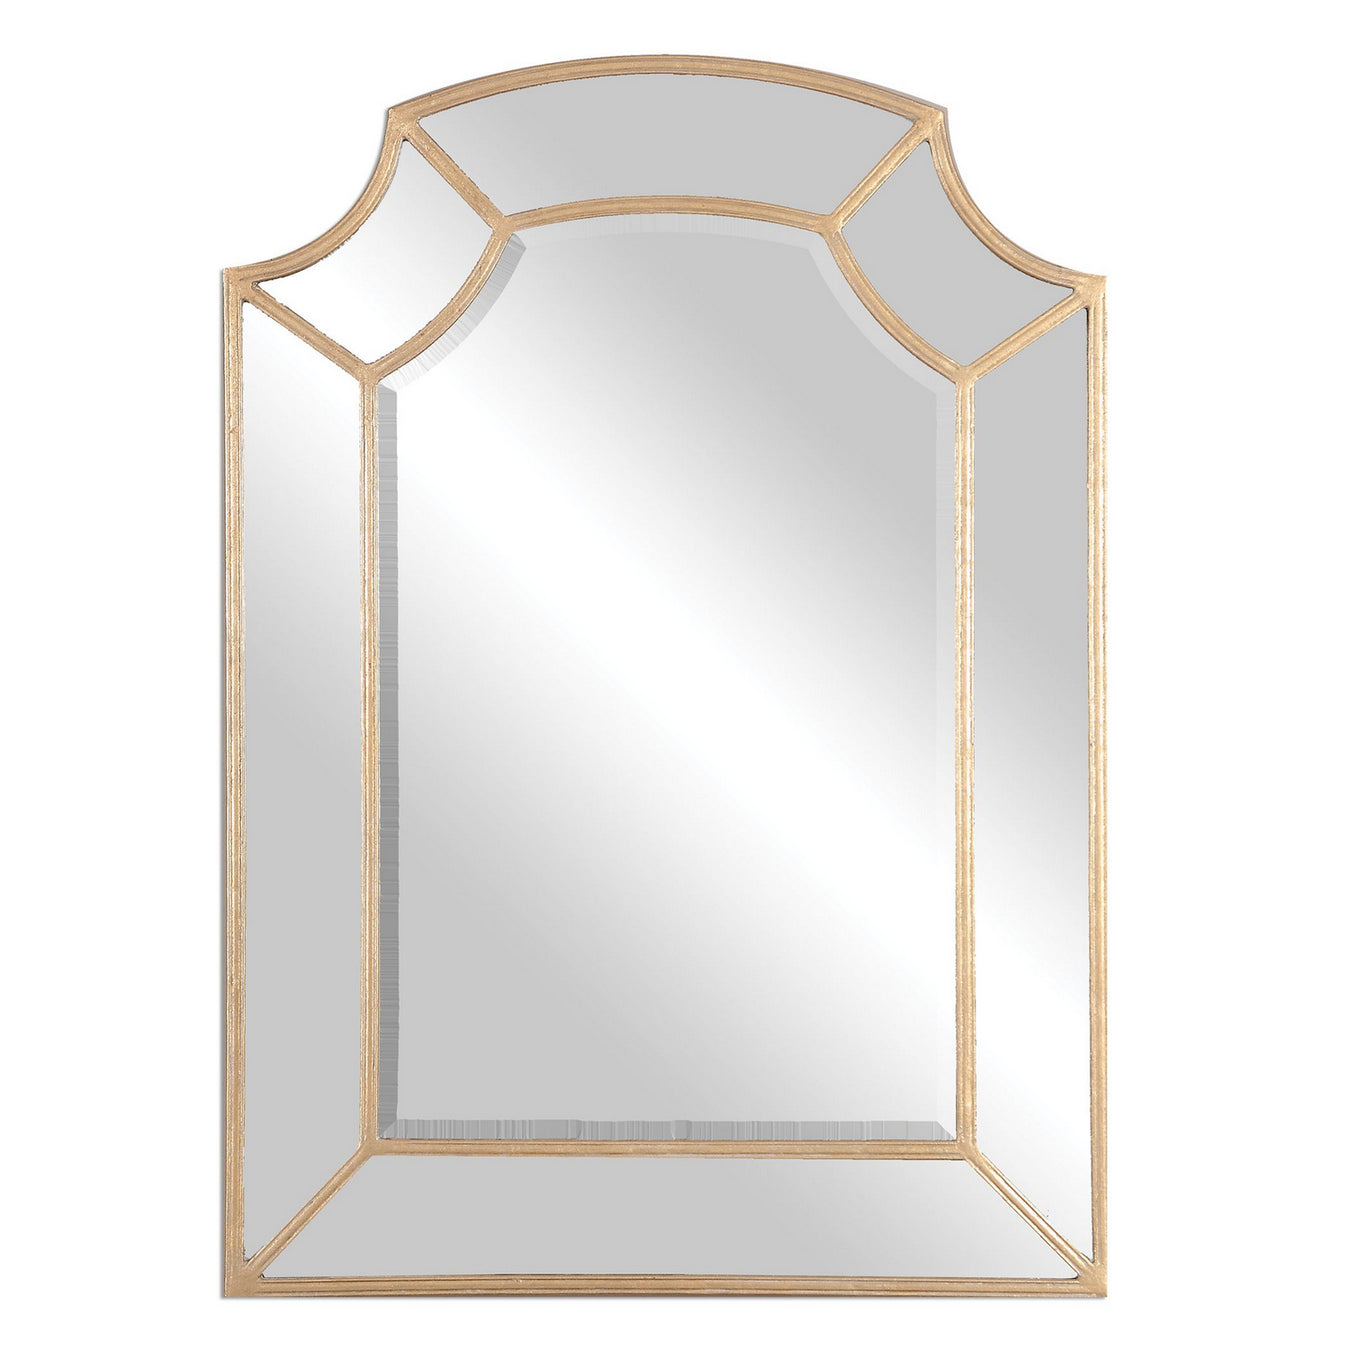 Uttermost's Francoli Gold Arch Mirror Designed by Grace Feyock